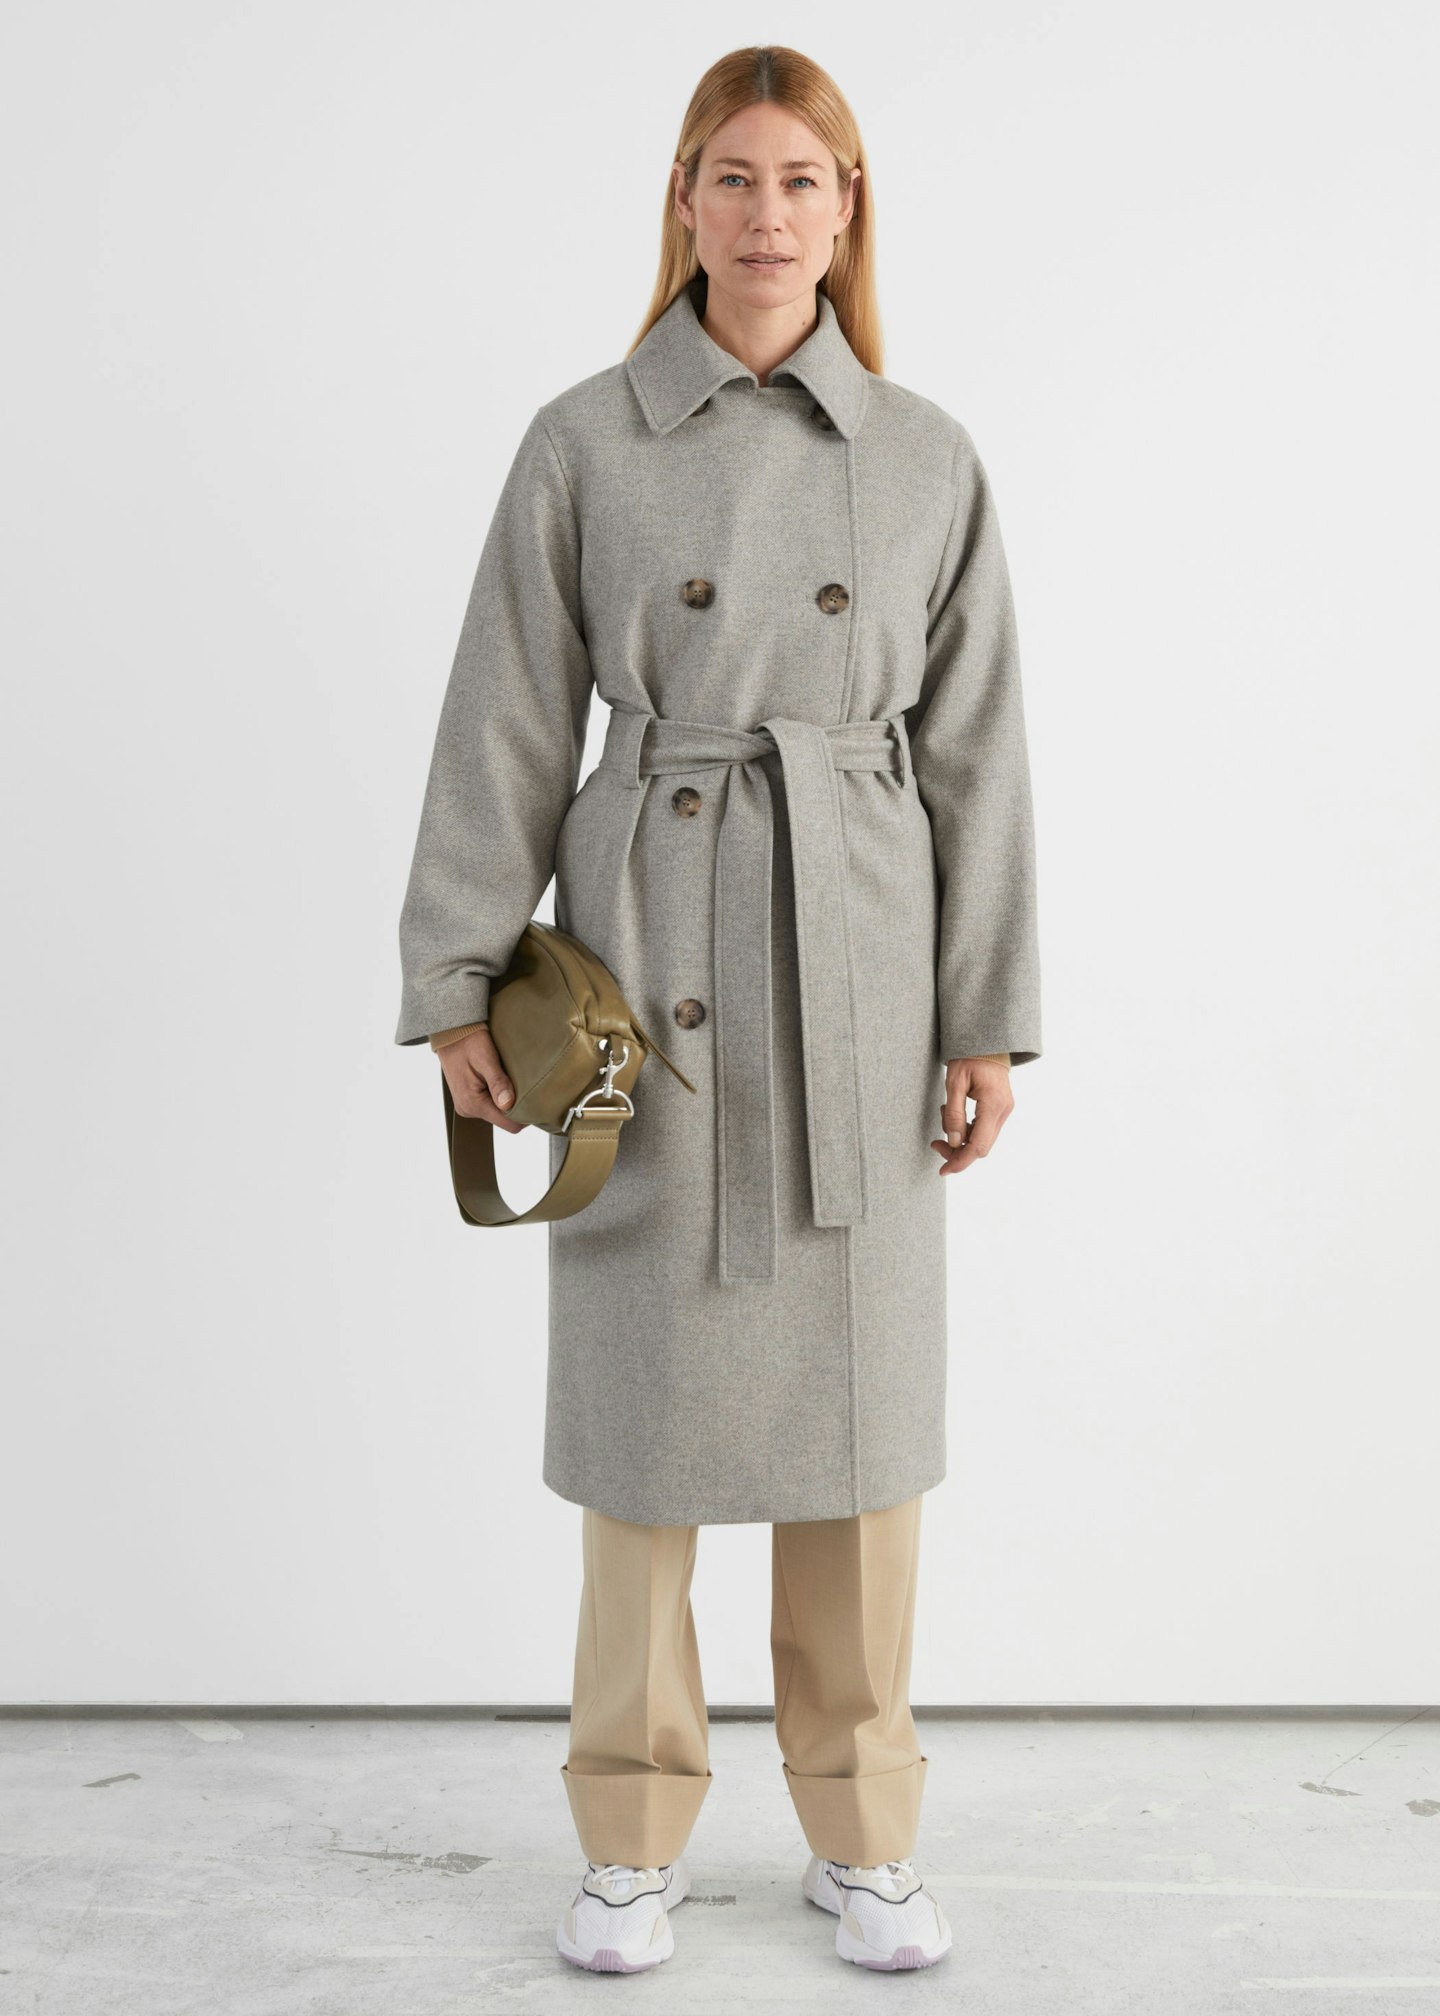 & Other Stories, Relaxed Wool-Blend Trench Coat, £175